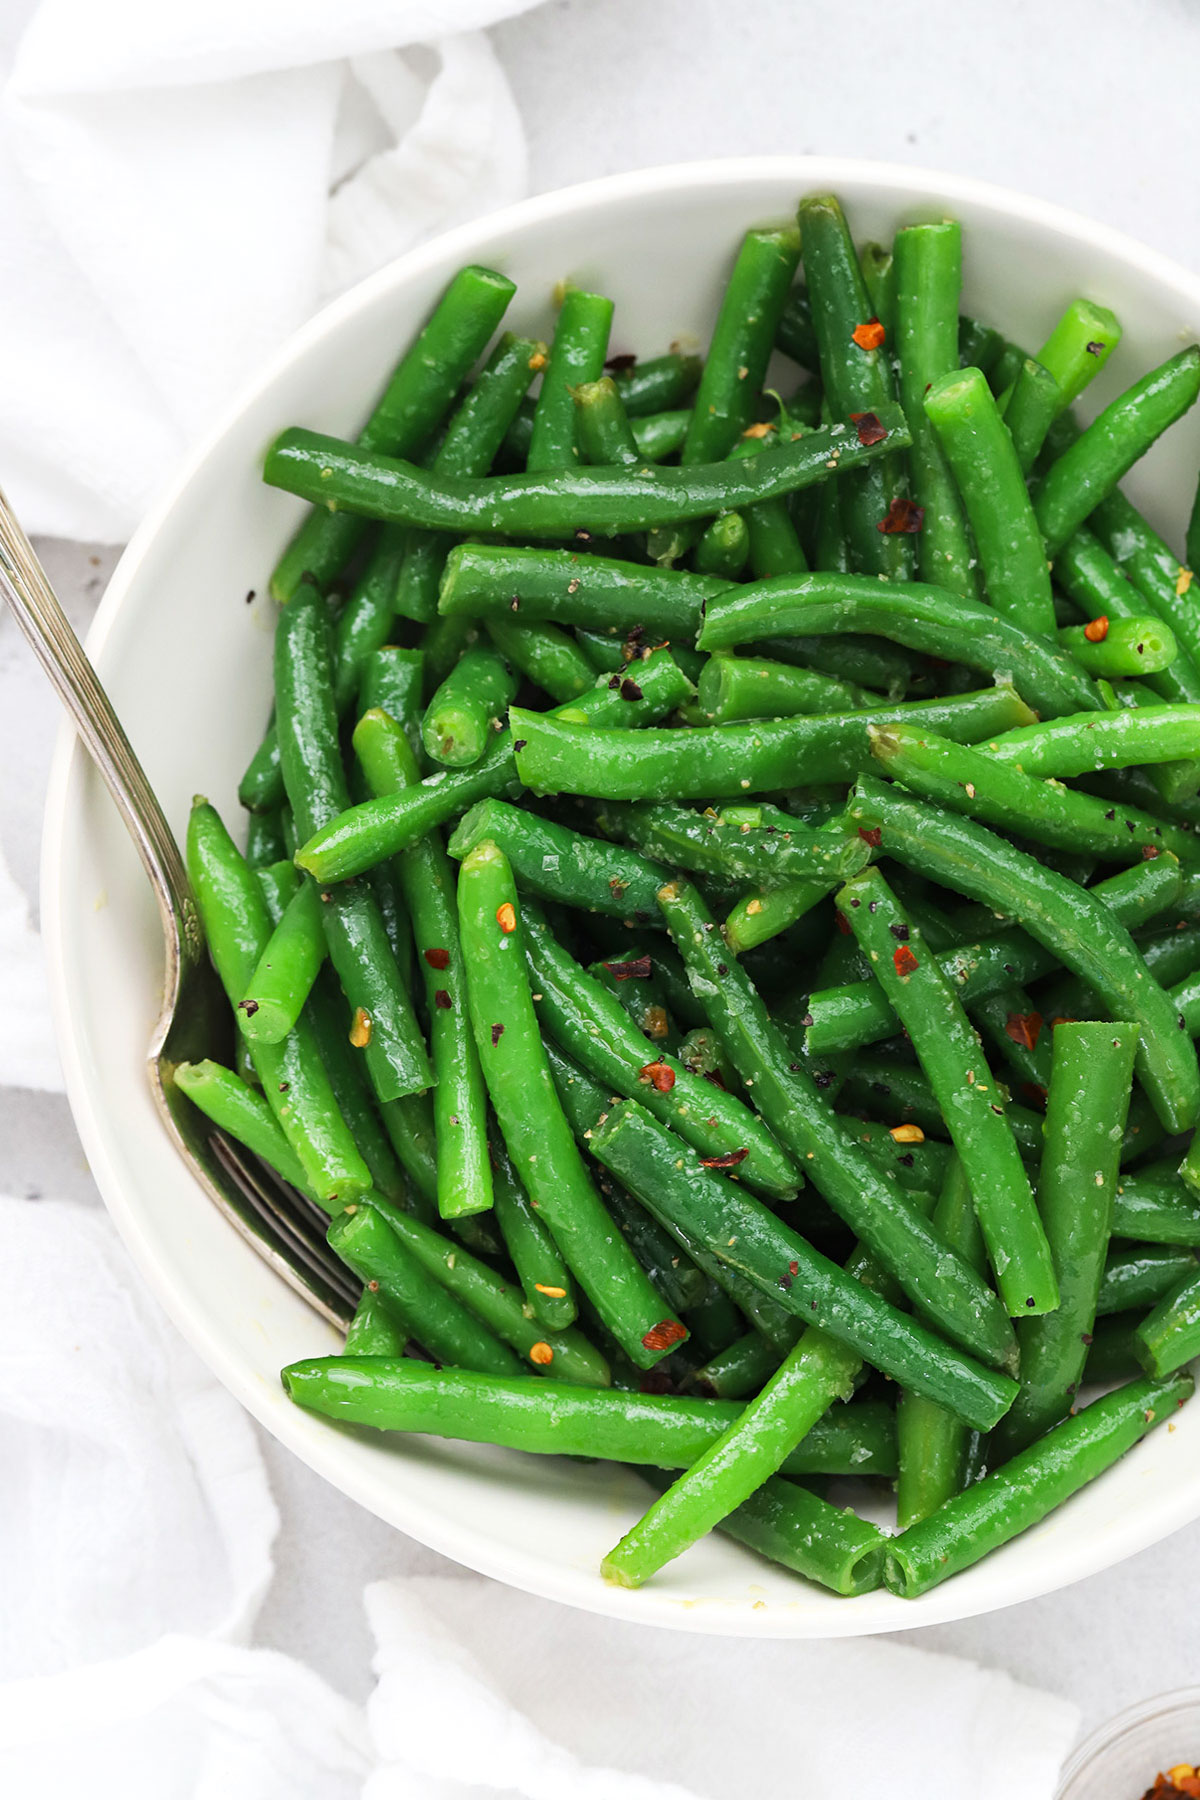 Green beans with seasoning